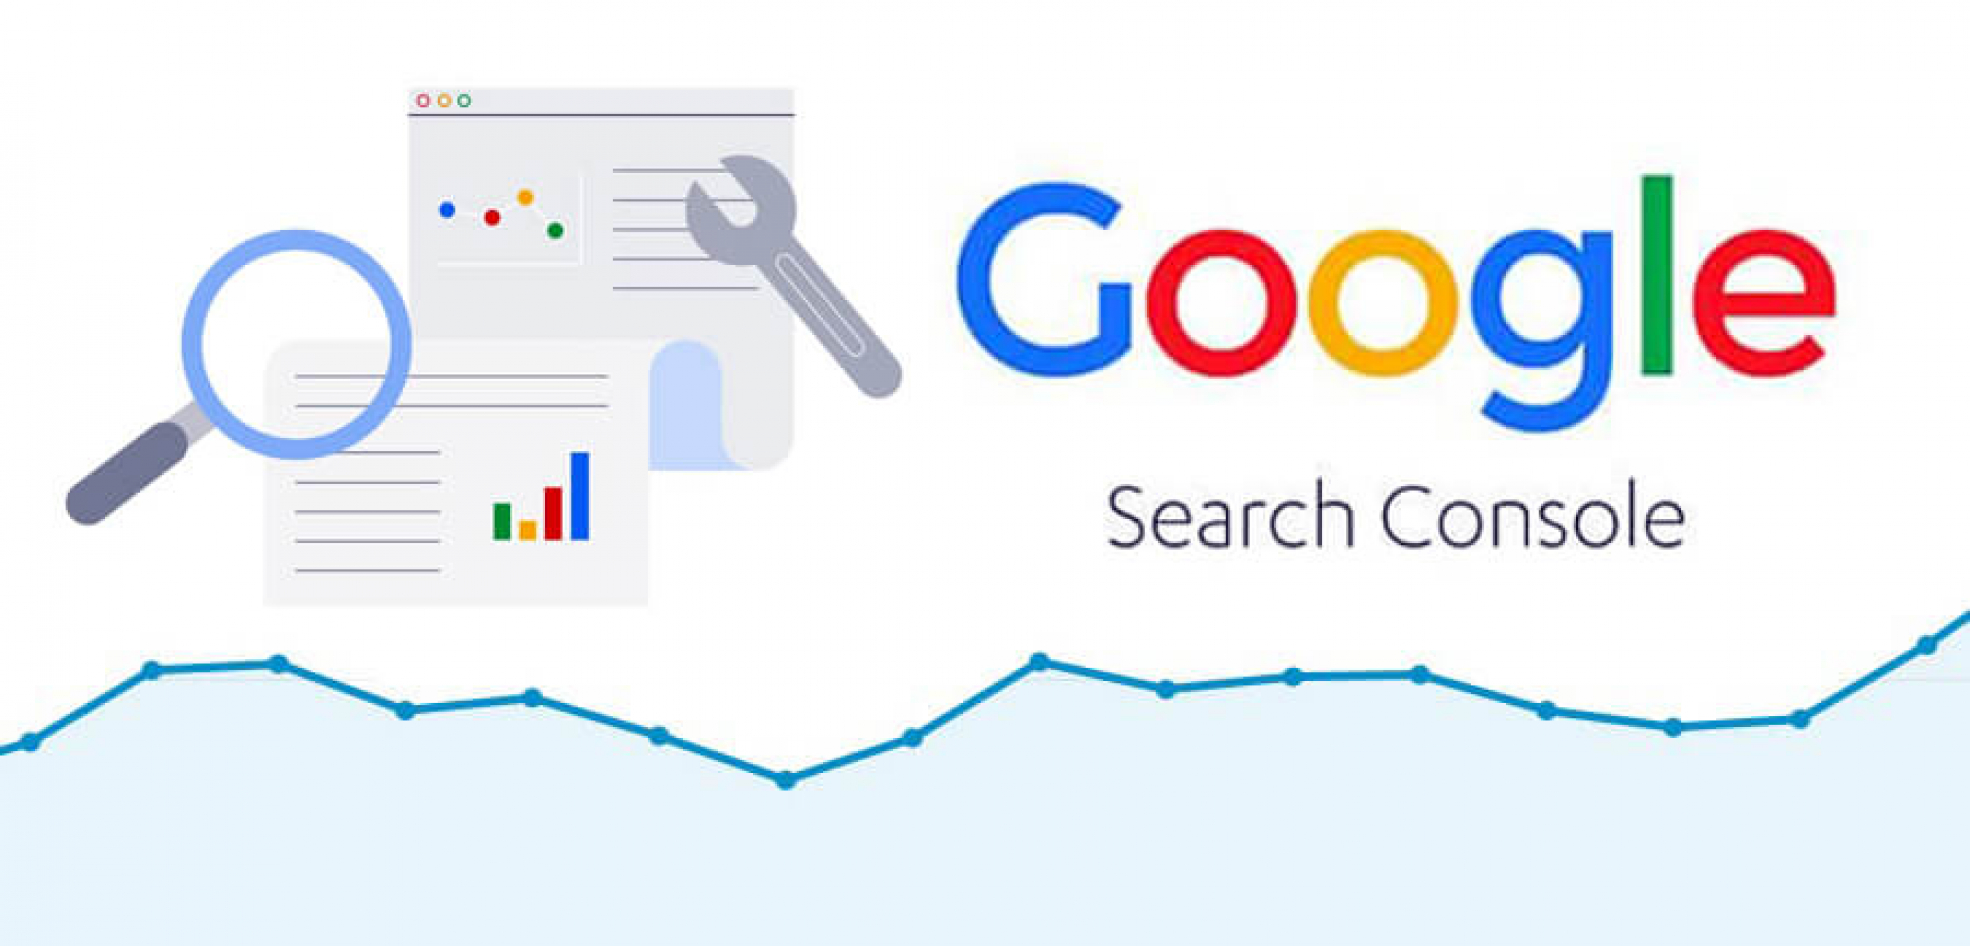 How to use Google Search Console for SEO